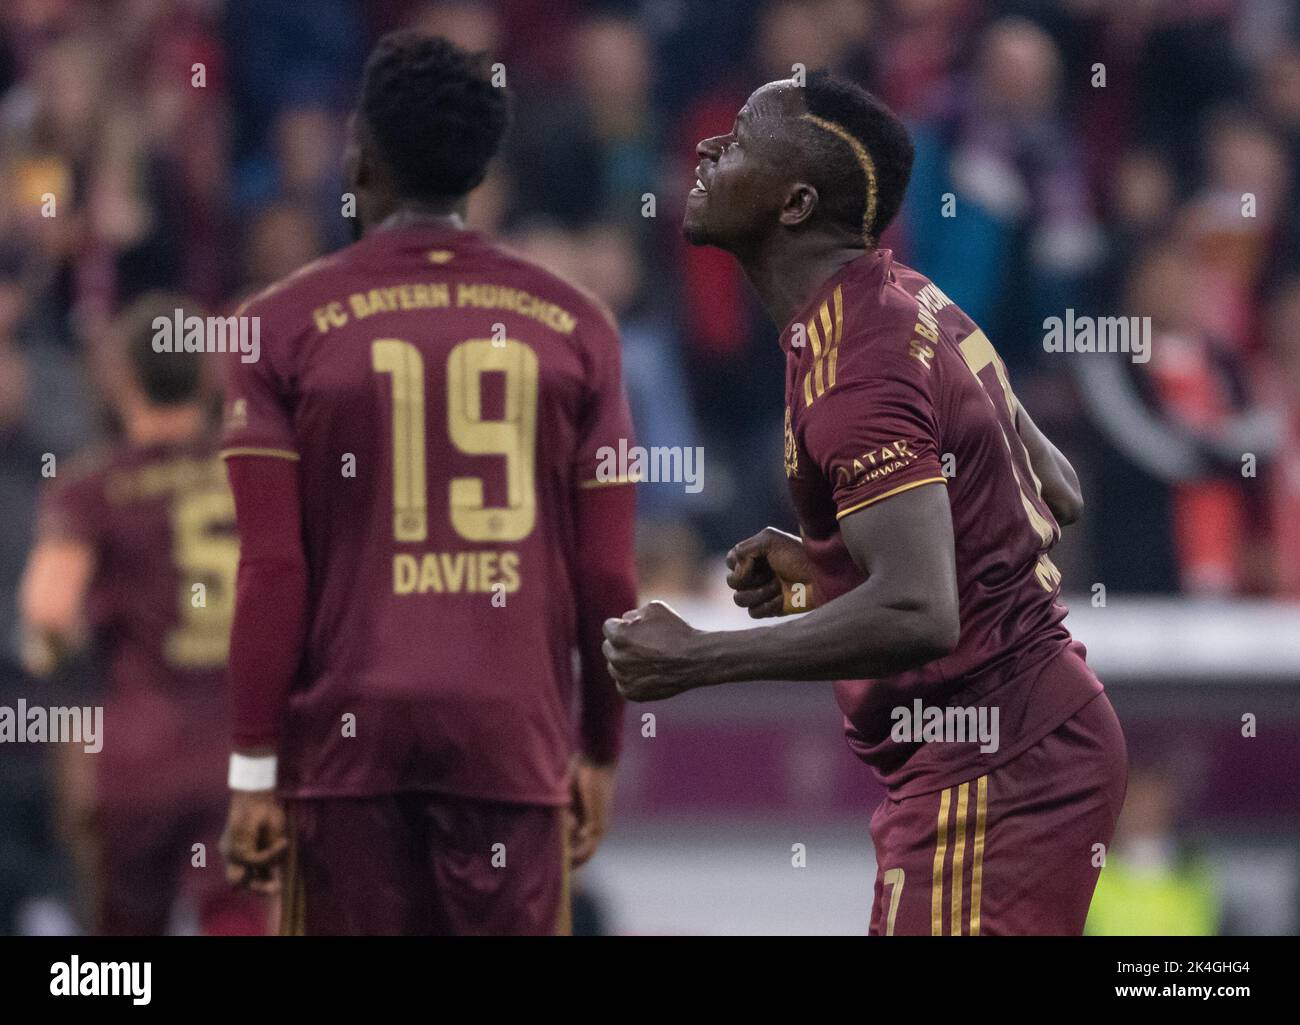 Munich, Germany. 30th Sep, 2022. Soccer: Bundesliga, Bayern Munich - Bayer Leverkusen, Matchday 8 at Allianz Arena. Sadio Mane of Munich gestures on the pitch. Credit: Sven Hoppe/dpa - IMPORTANT NOTE: In accordance with the requirements of the DFL Deutsche Fußball Liga and the DFB Deutscher Fußball-Bund, it is prohibited to use or have used photographs taken in the stadium and/or of the match in the form of sequence pictures and/or video-like photo series./dpa/Alamy Live News Stock Photo